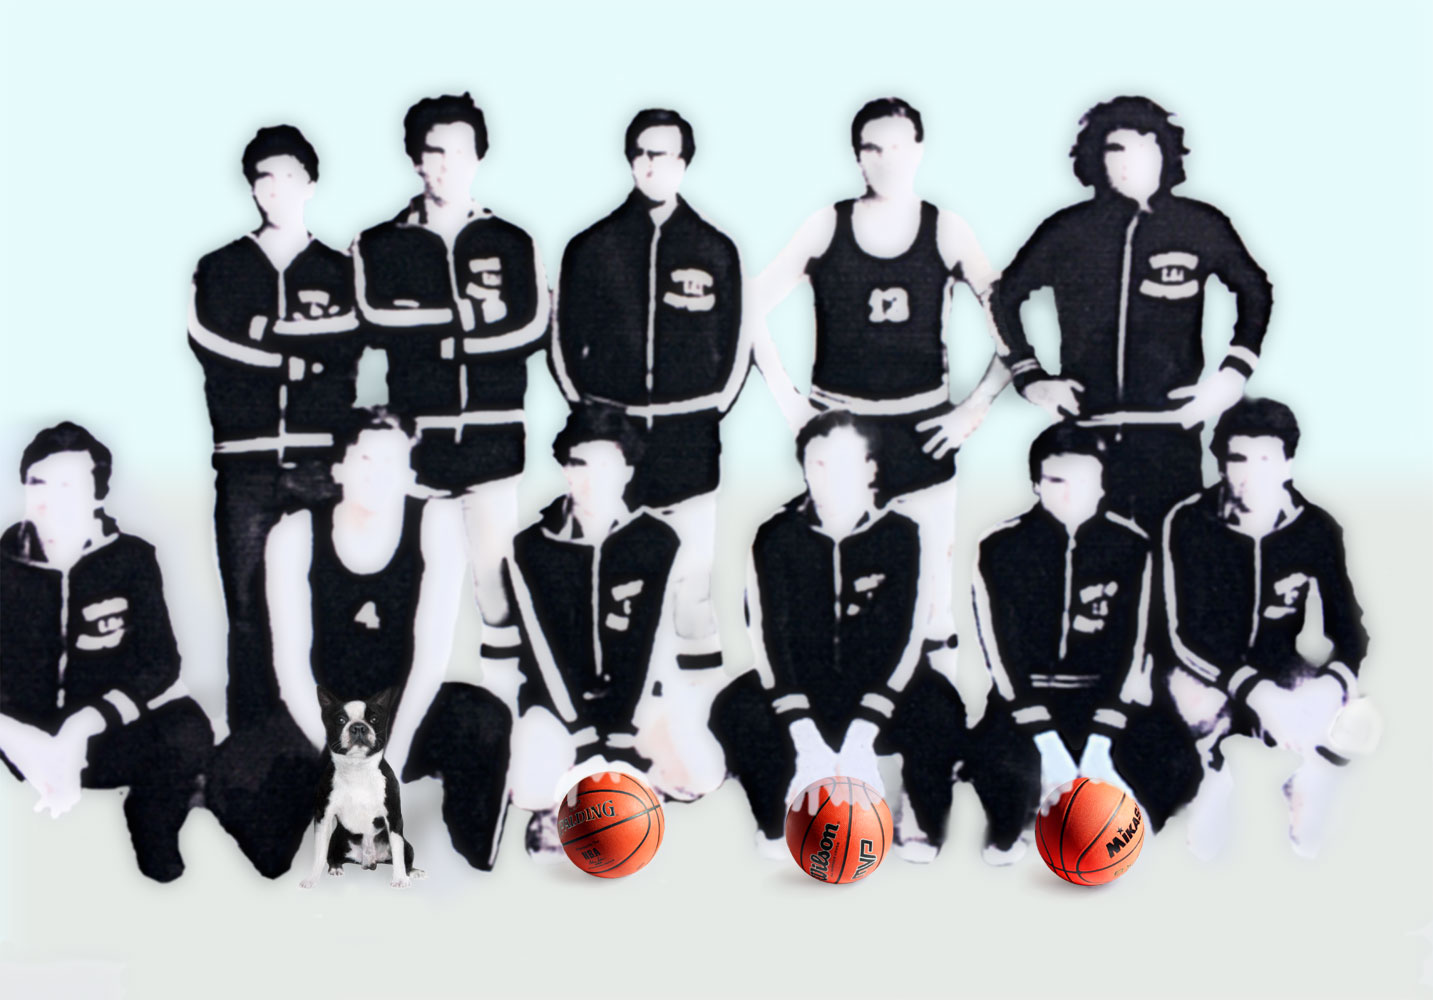 Michael Croft | Painting | Forever Now | Basketball | Dog | Artist